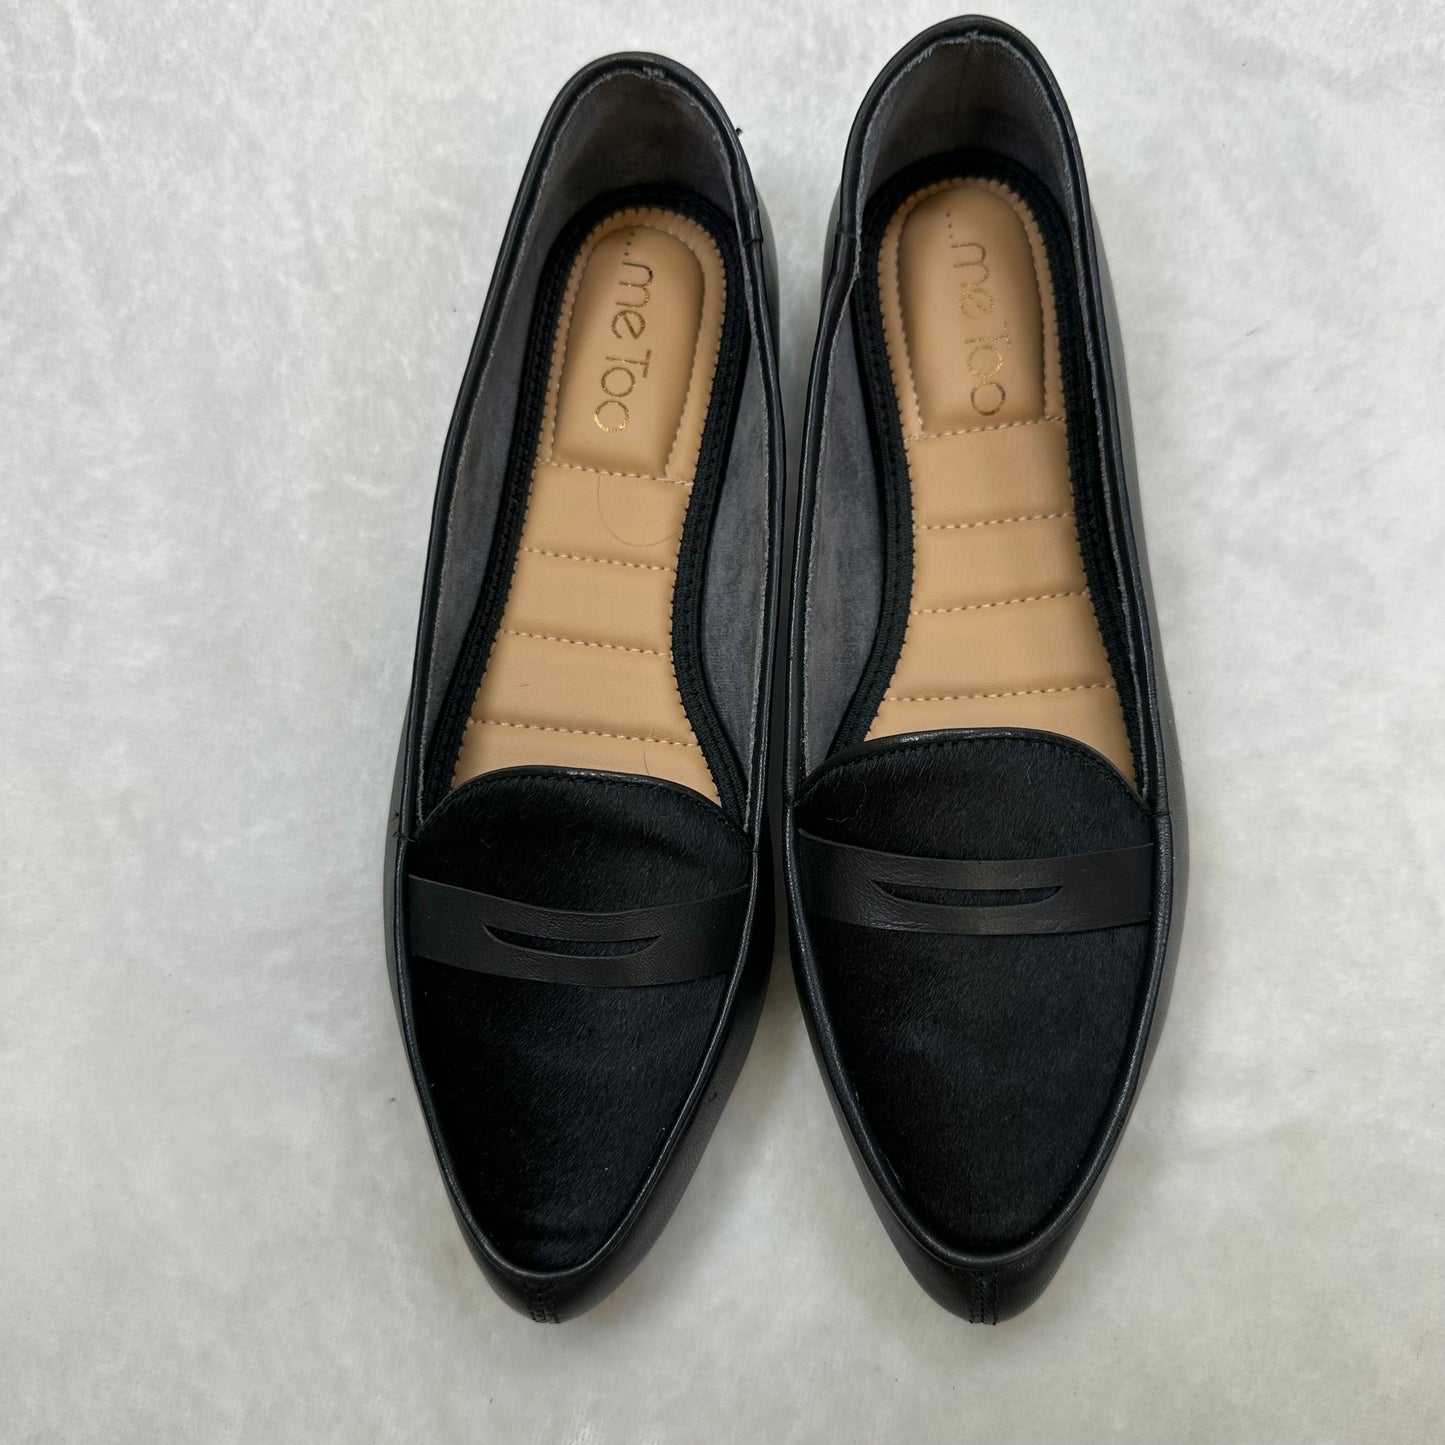 Shoes Flats Ballet By Me Too  Size: 6.5